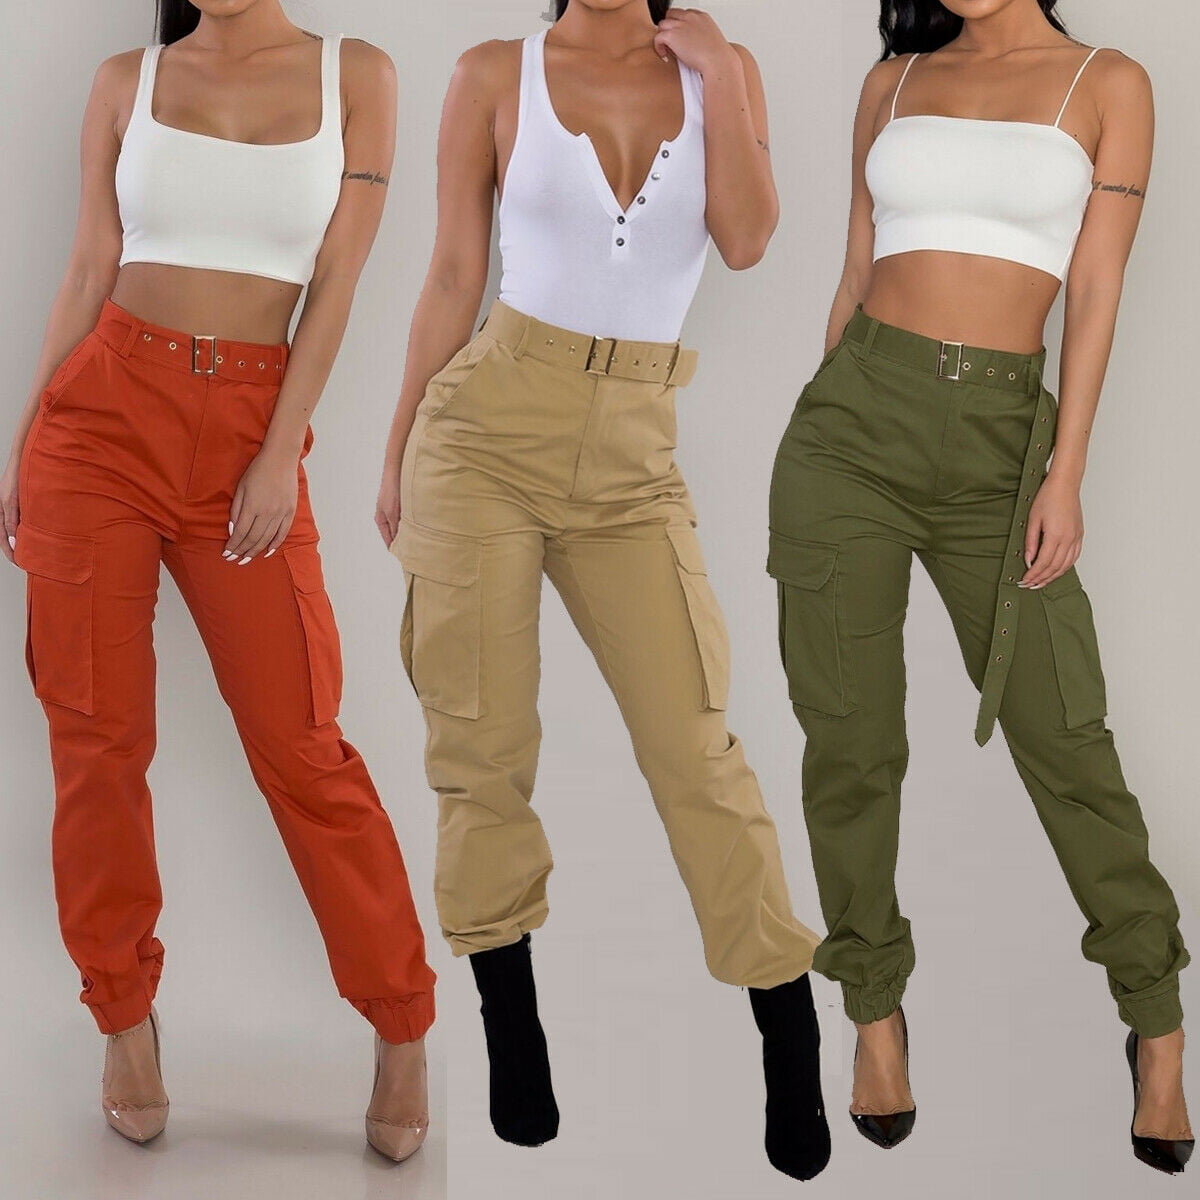 Women Overalls Pants Army Military Combat Style Pant Cargo Trousers